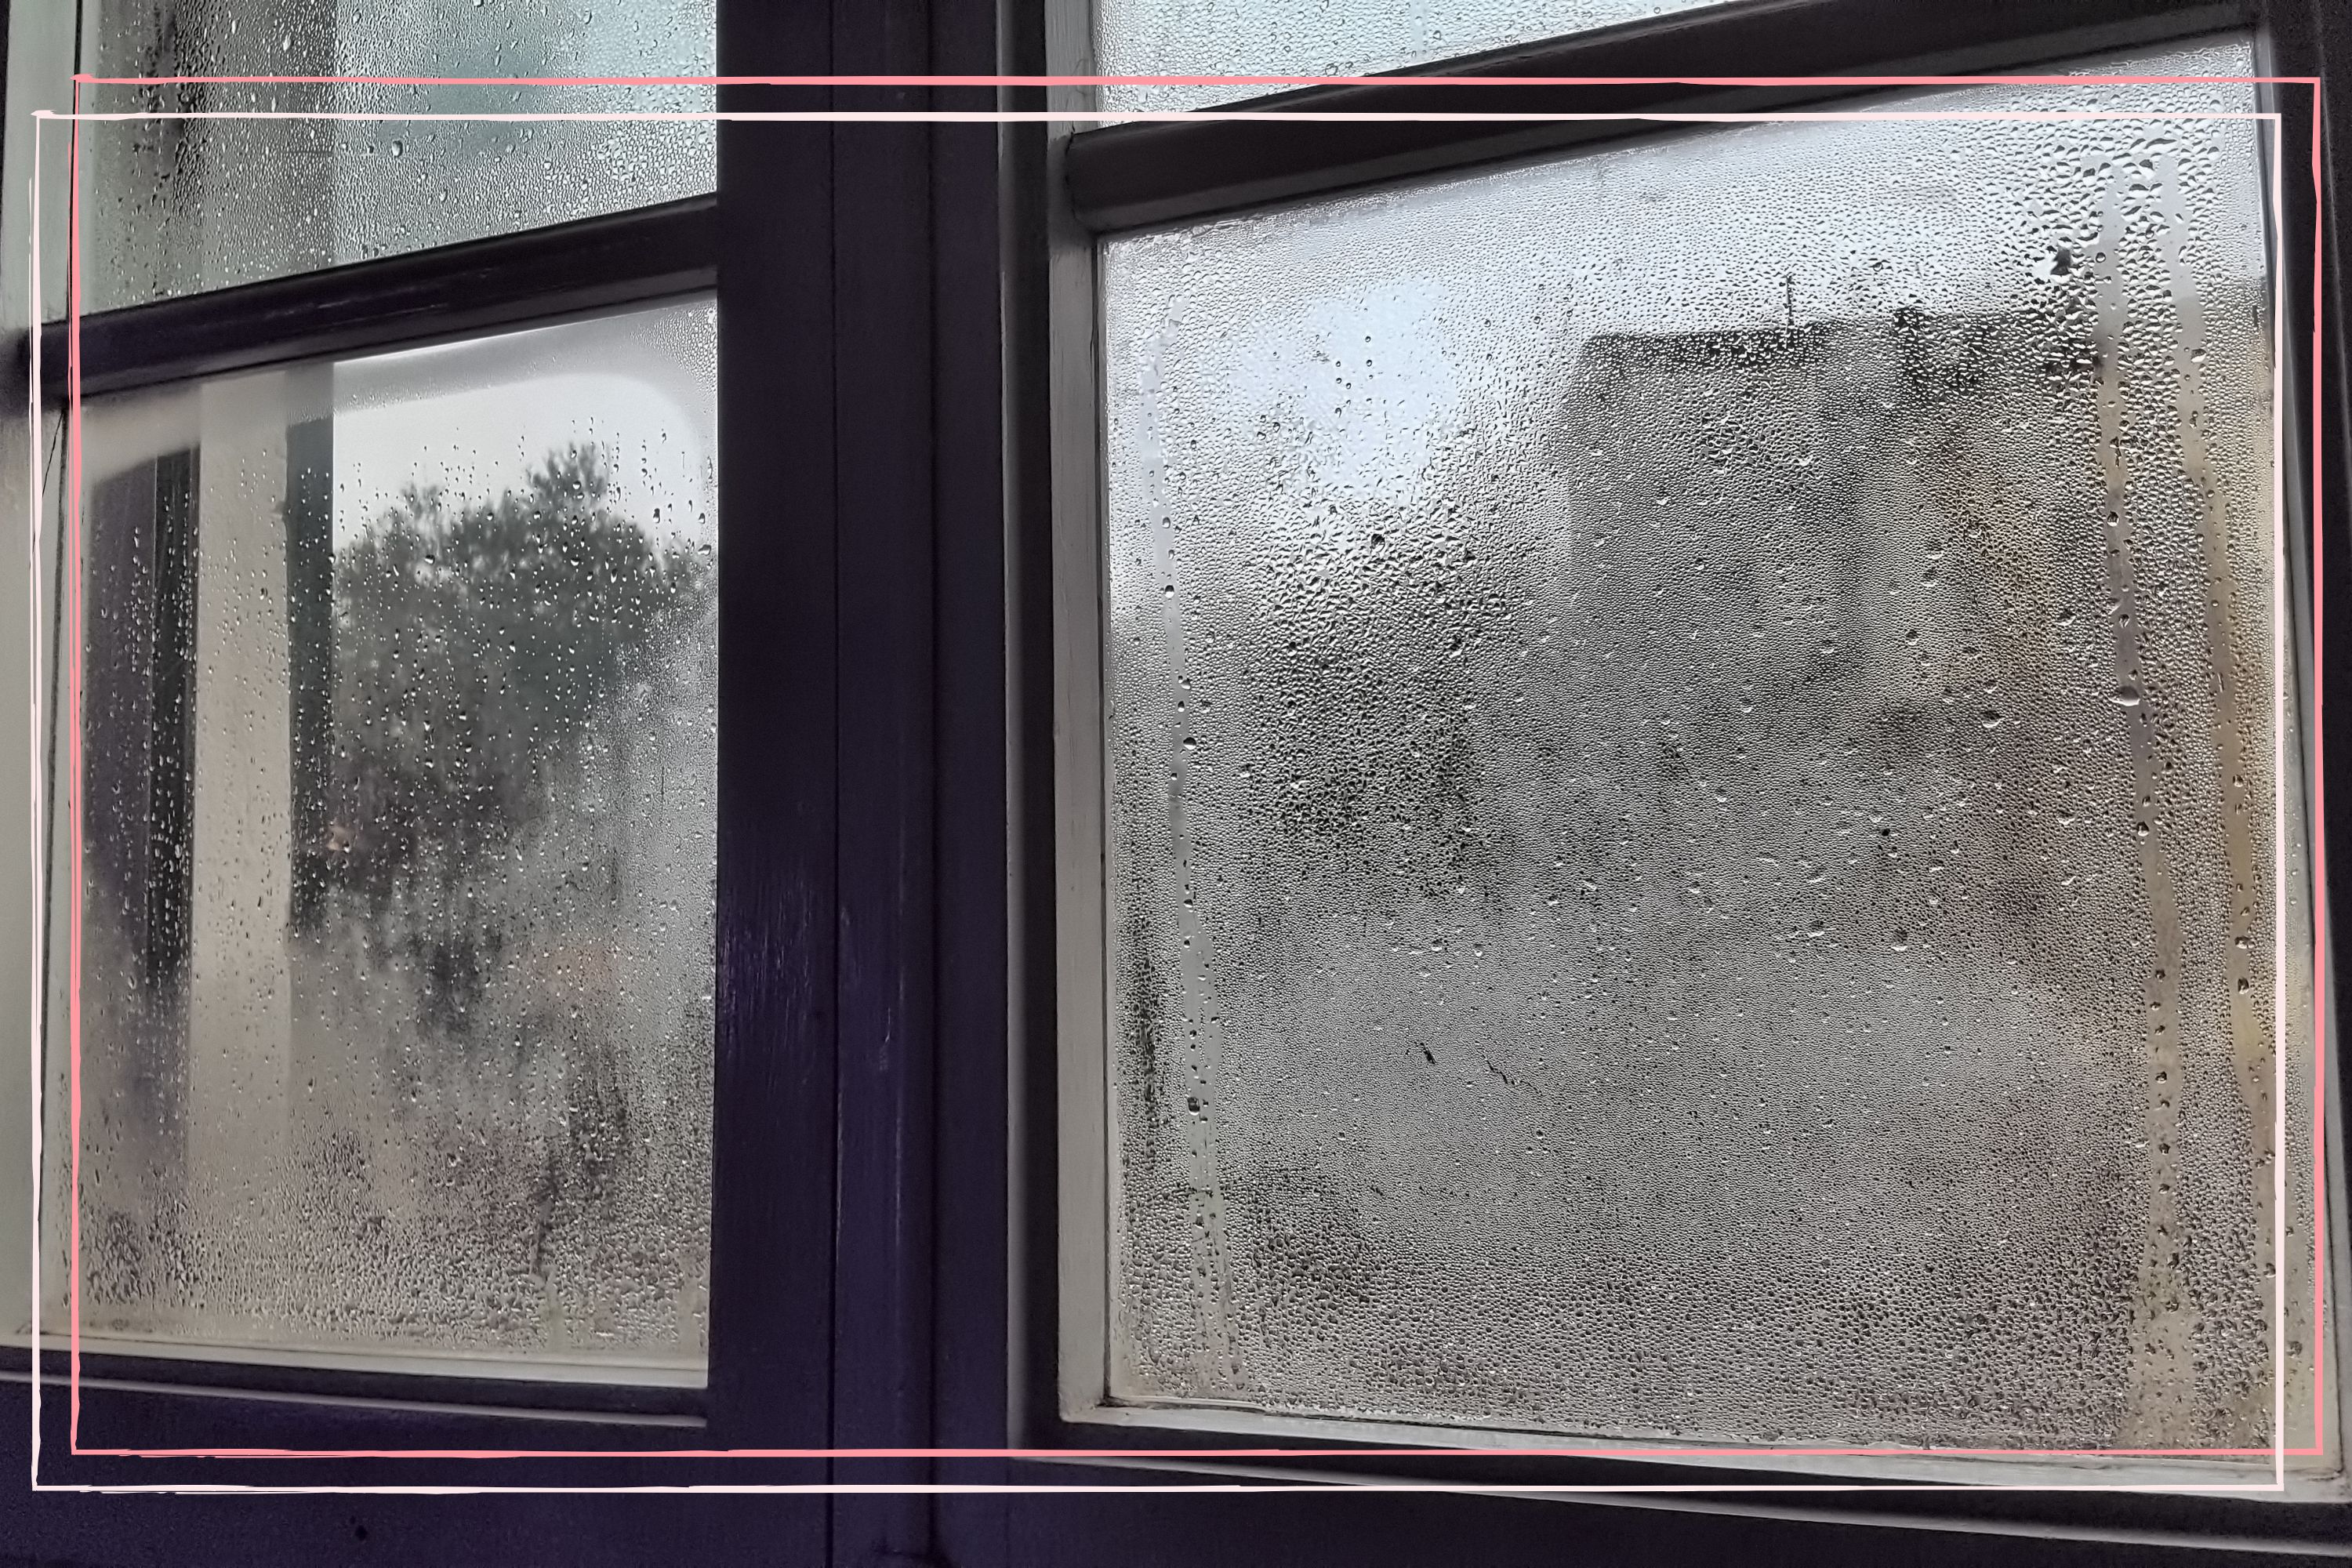 How to Avoid and Remove Window Condensation (DIY)